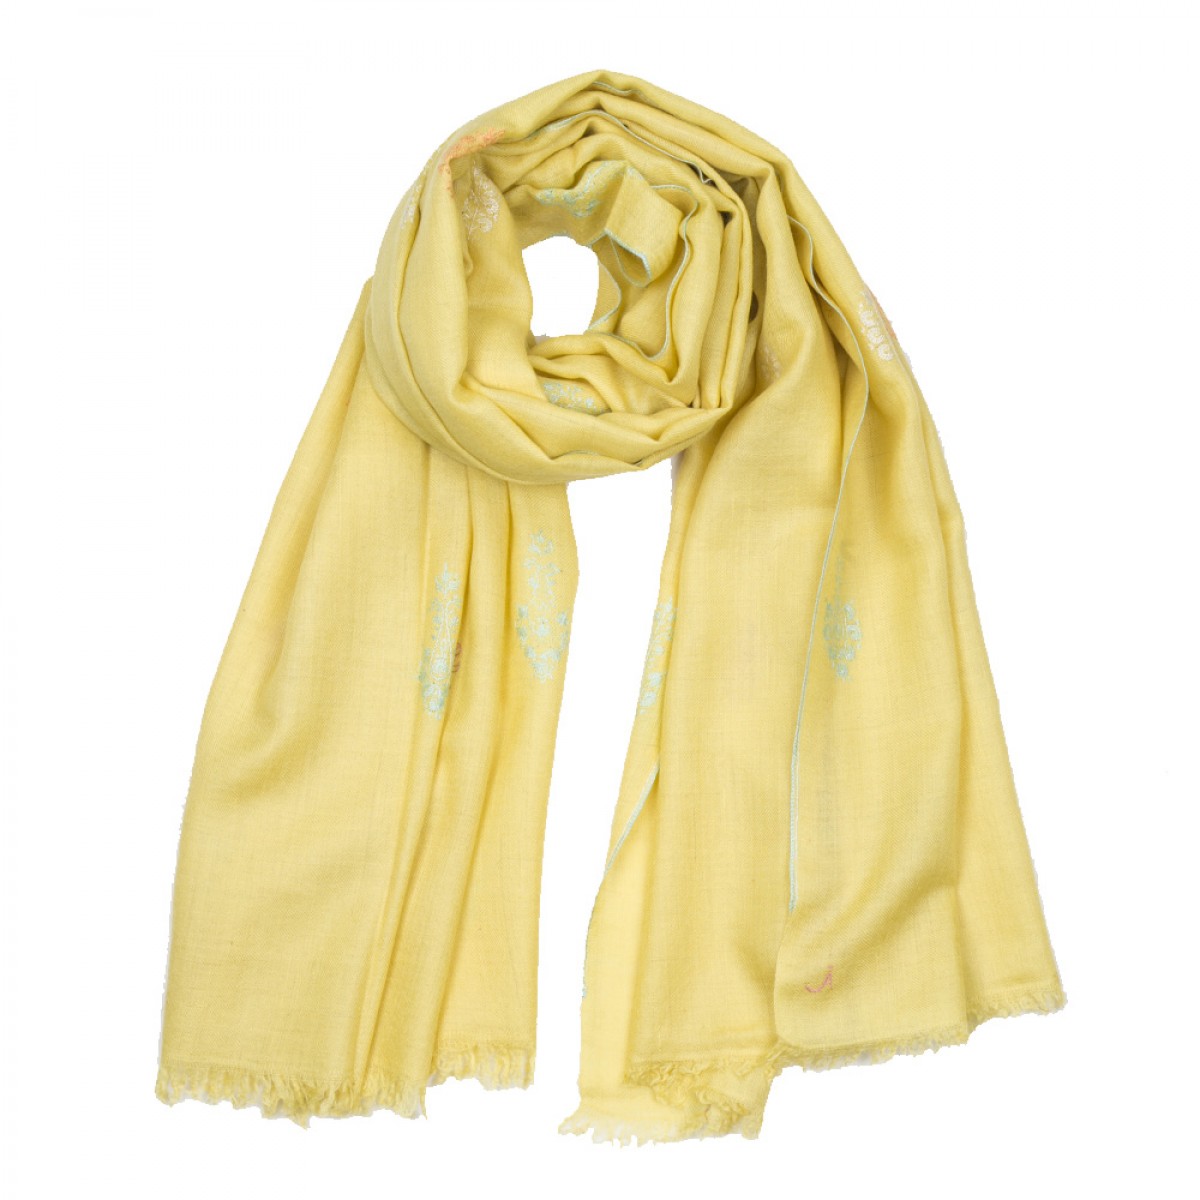 Embroidered Pashmina Stole - Baby Yellow & Blue